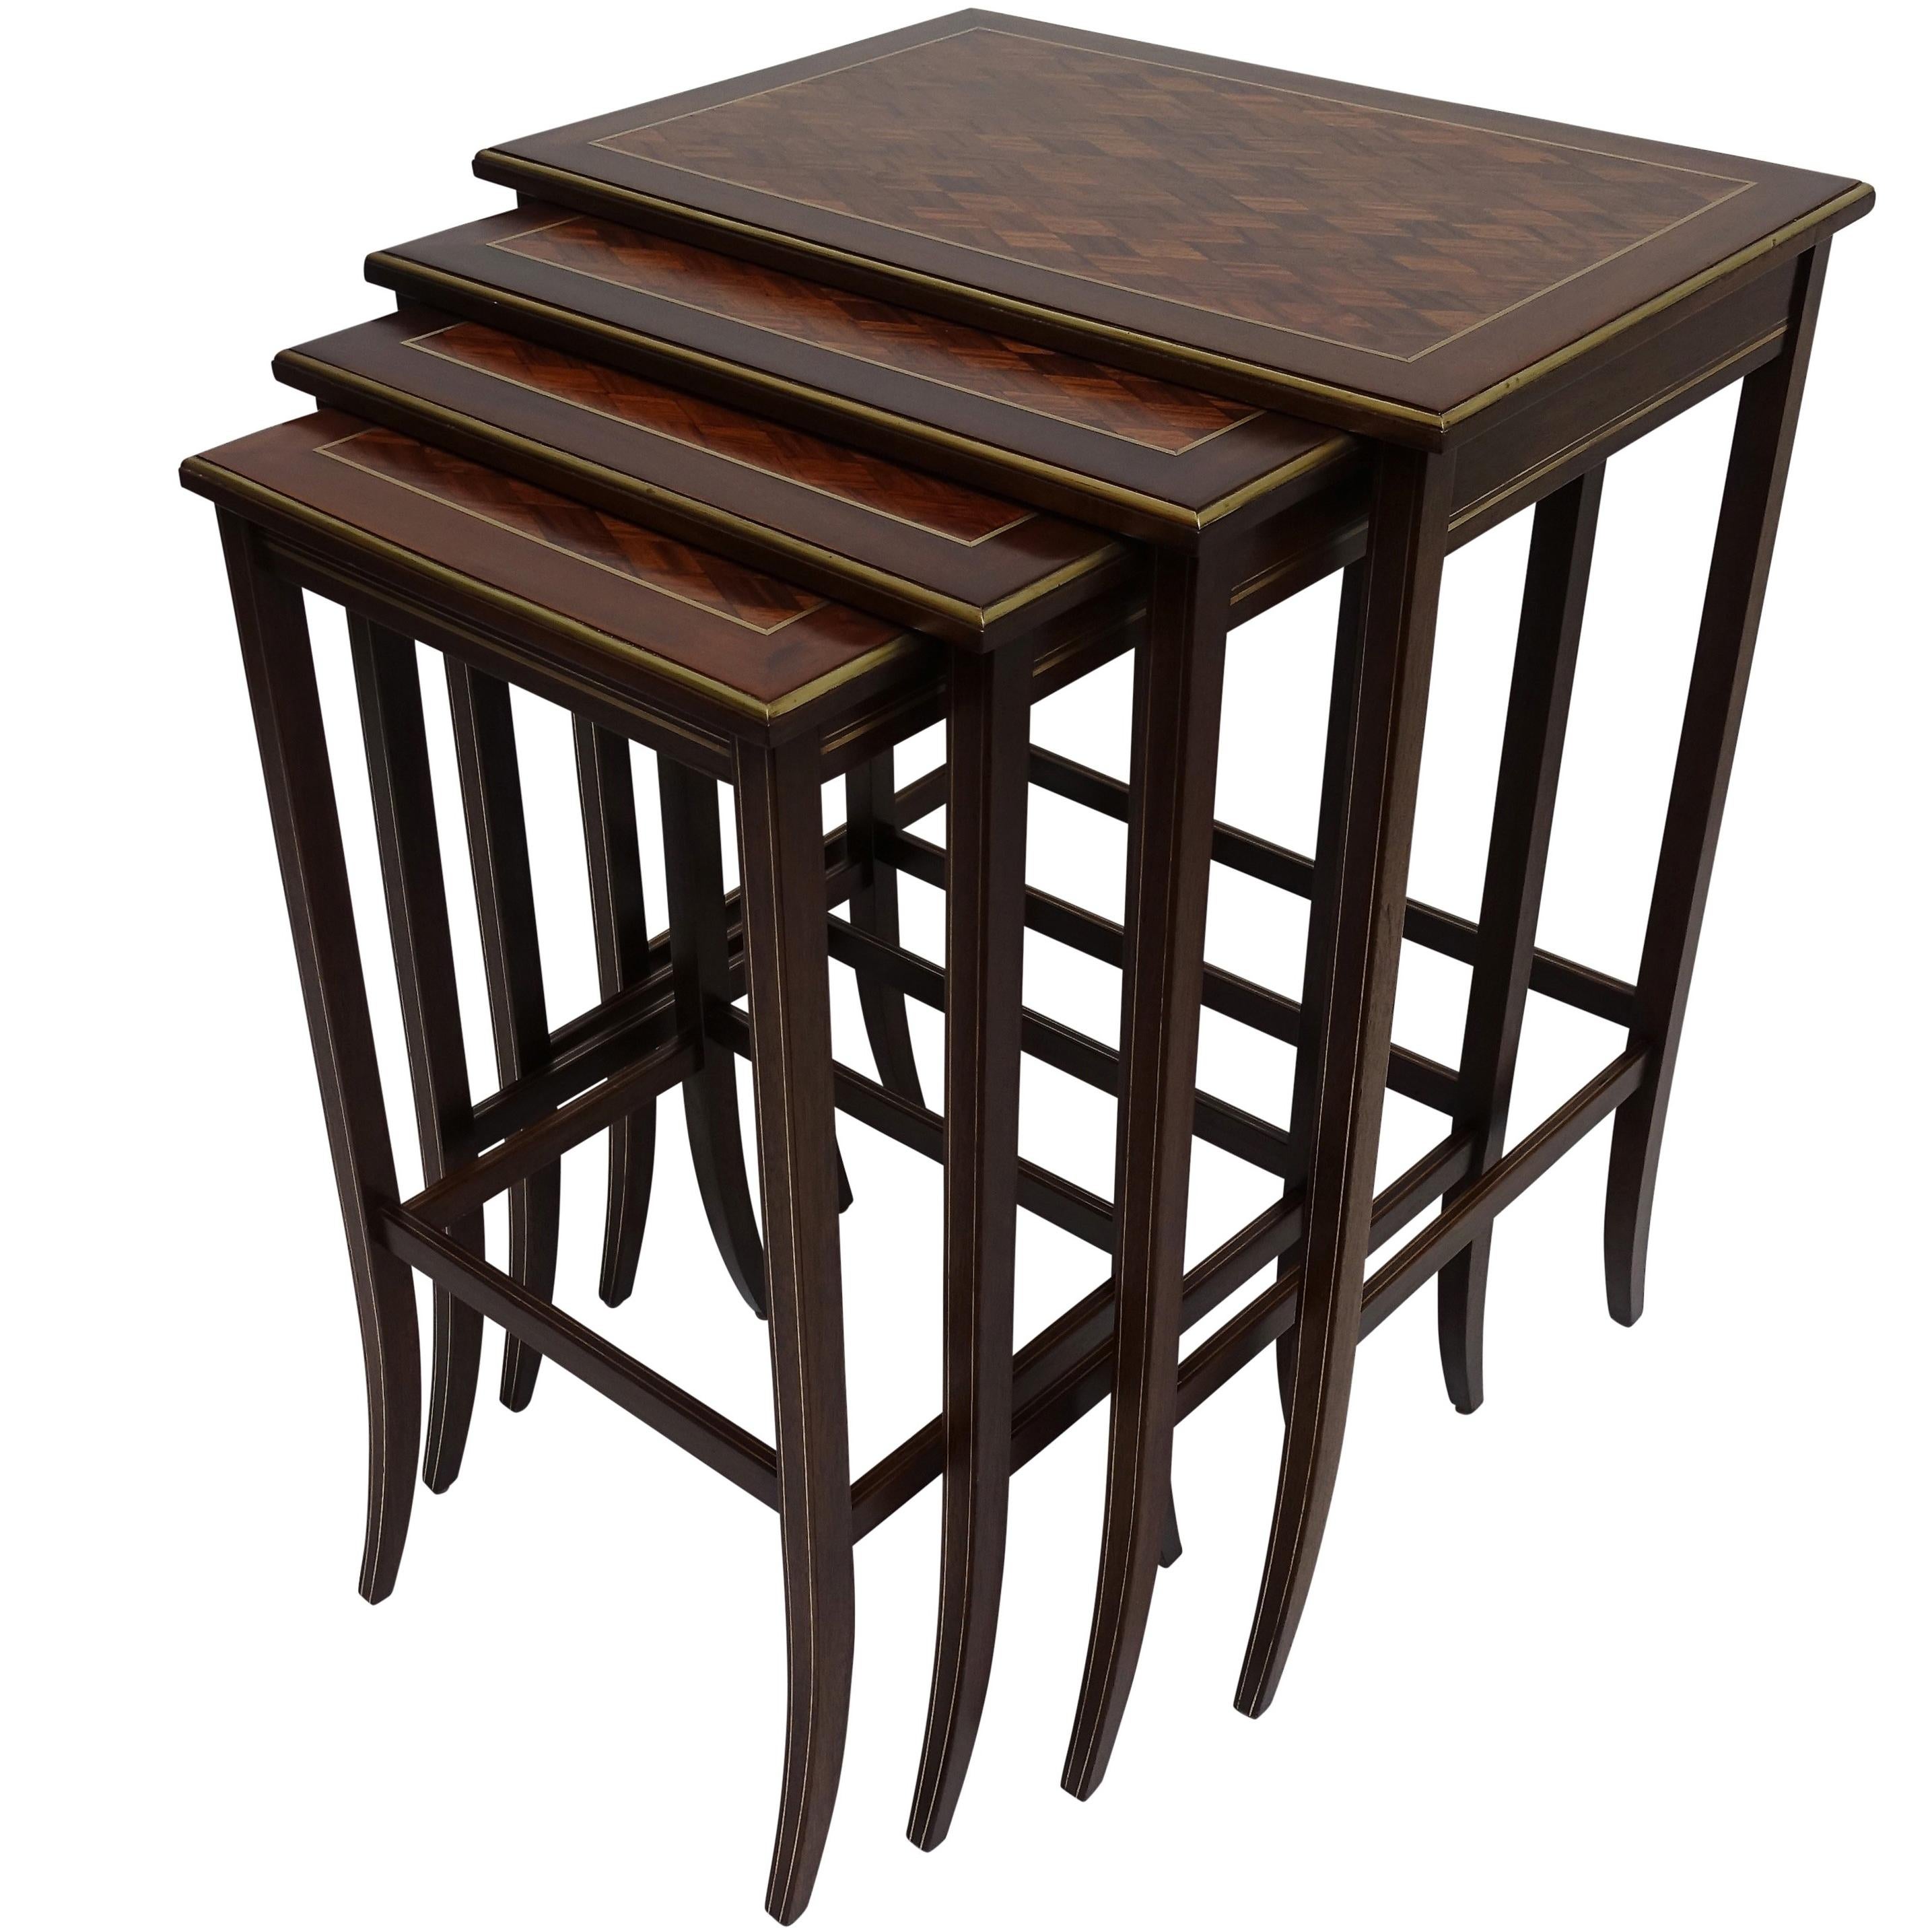 Set of Four Mahogany Nesting Tables with Brass Inlay and Trim, Mid-20th  Century For Sale at 1stDibs